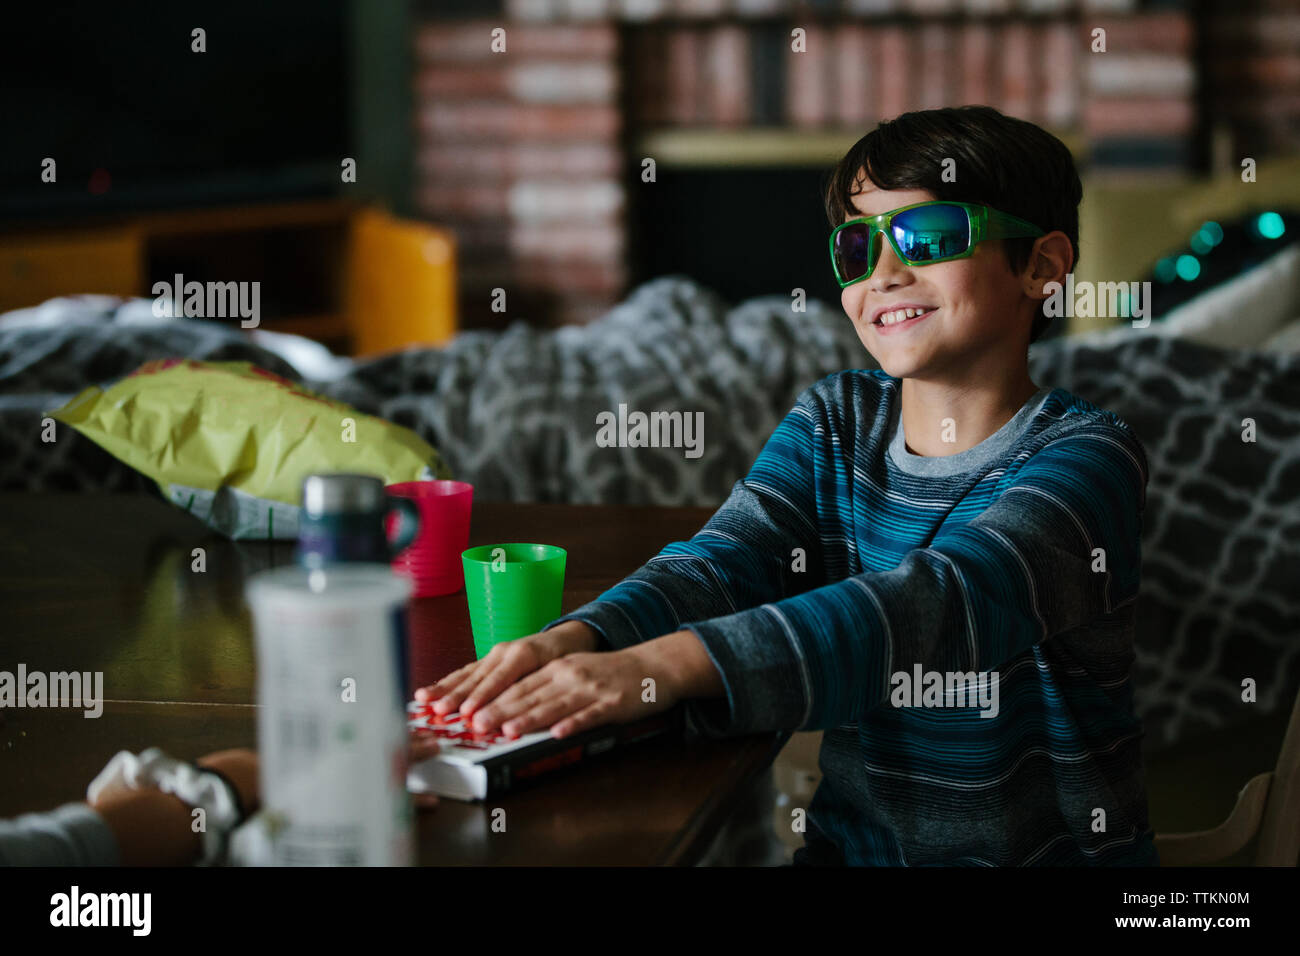 Boy wearing sunglasses inside smiles as he places hands on book Stock Photo